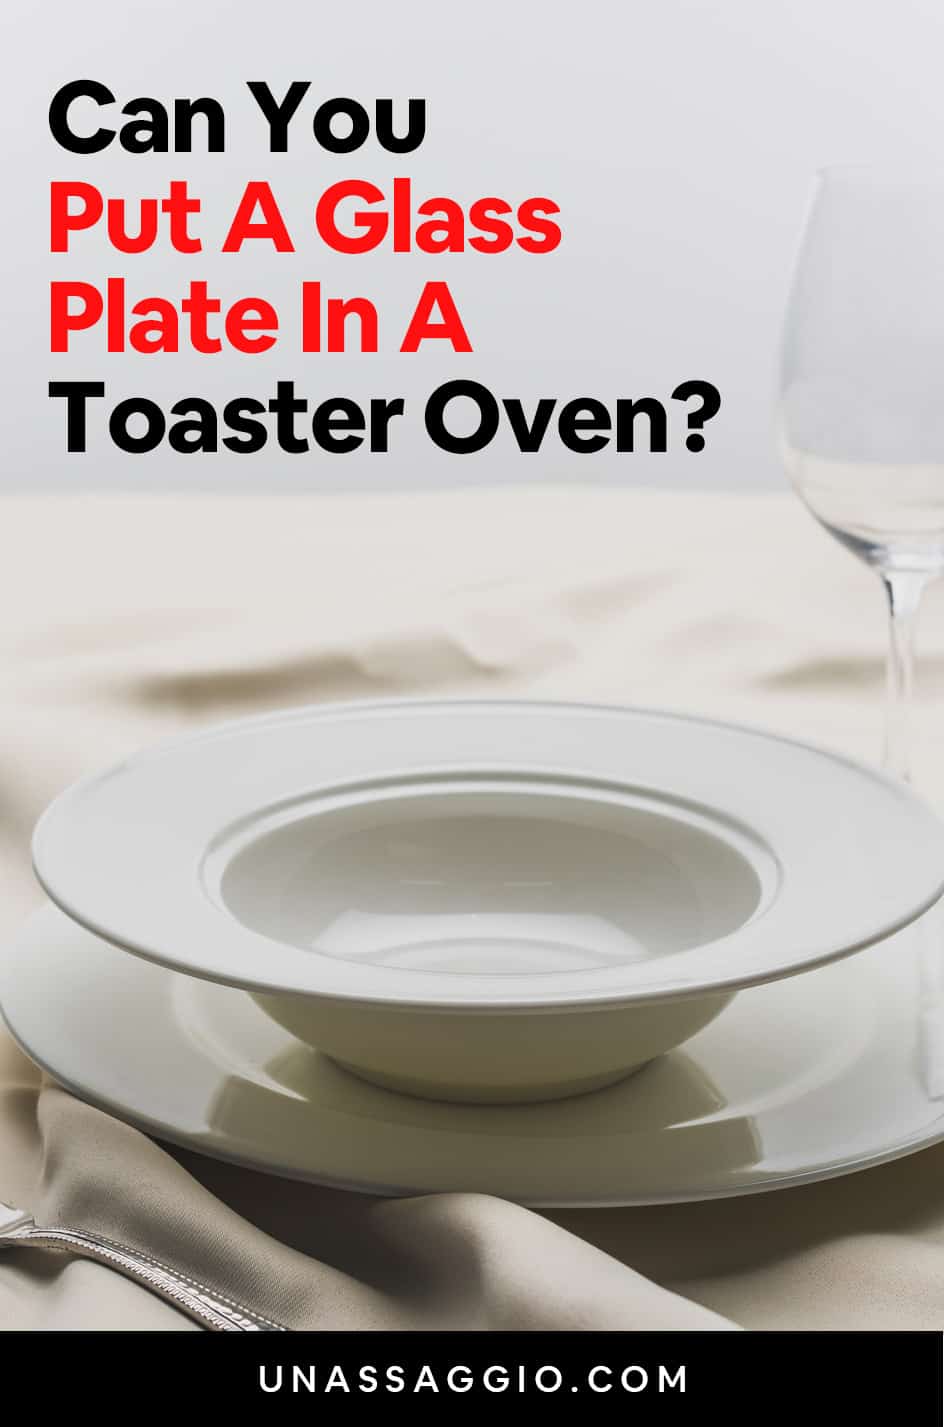 can you put a glass plate in a toaster oven?